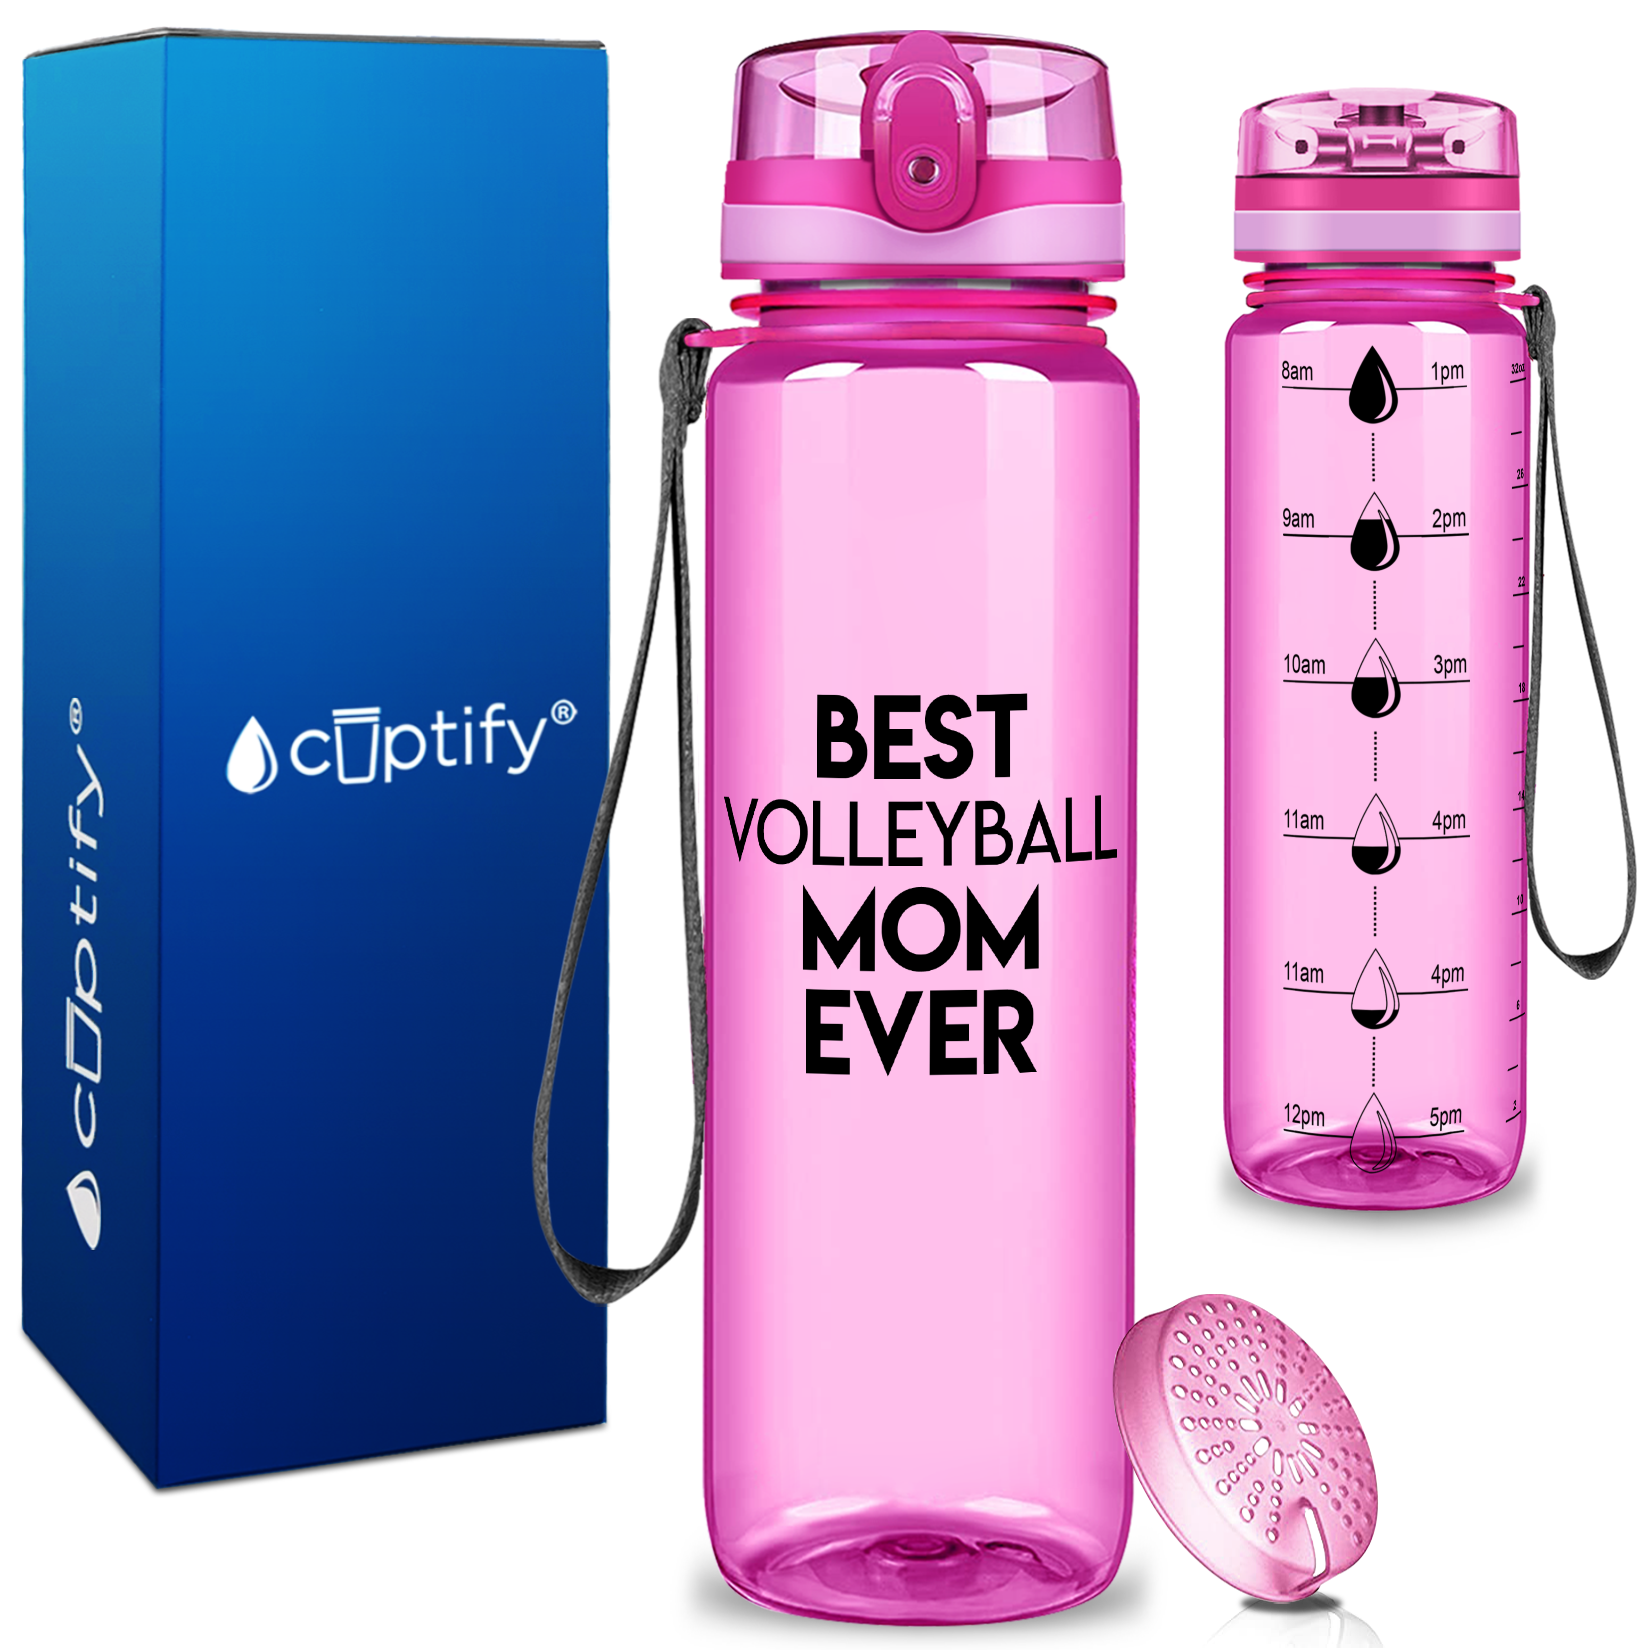 Best Volleyball Mom Ever on 32 oz Motivational Tracking Water Bottle